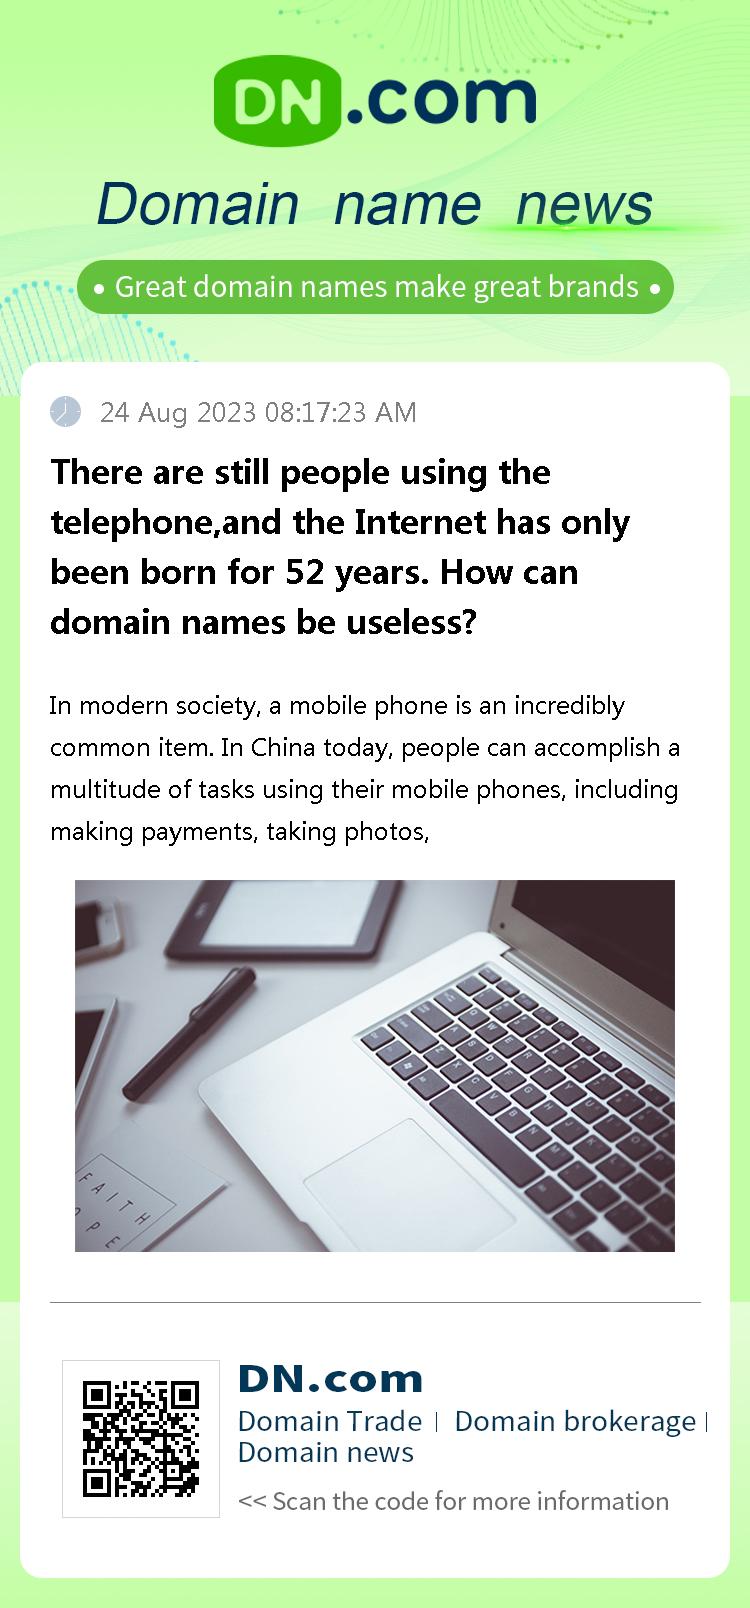 There are still people using the telephone,and the Internet has only been born for 52 years. How can domain names be useless?